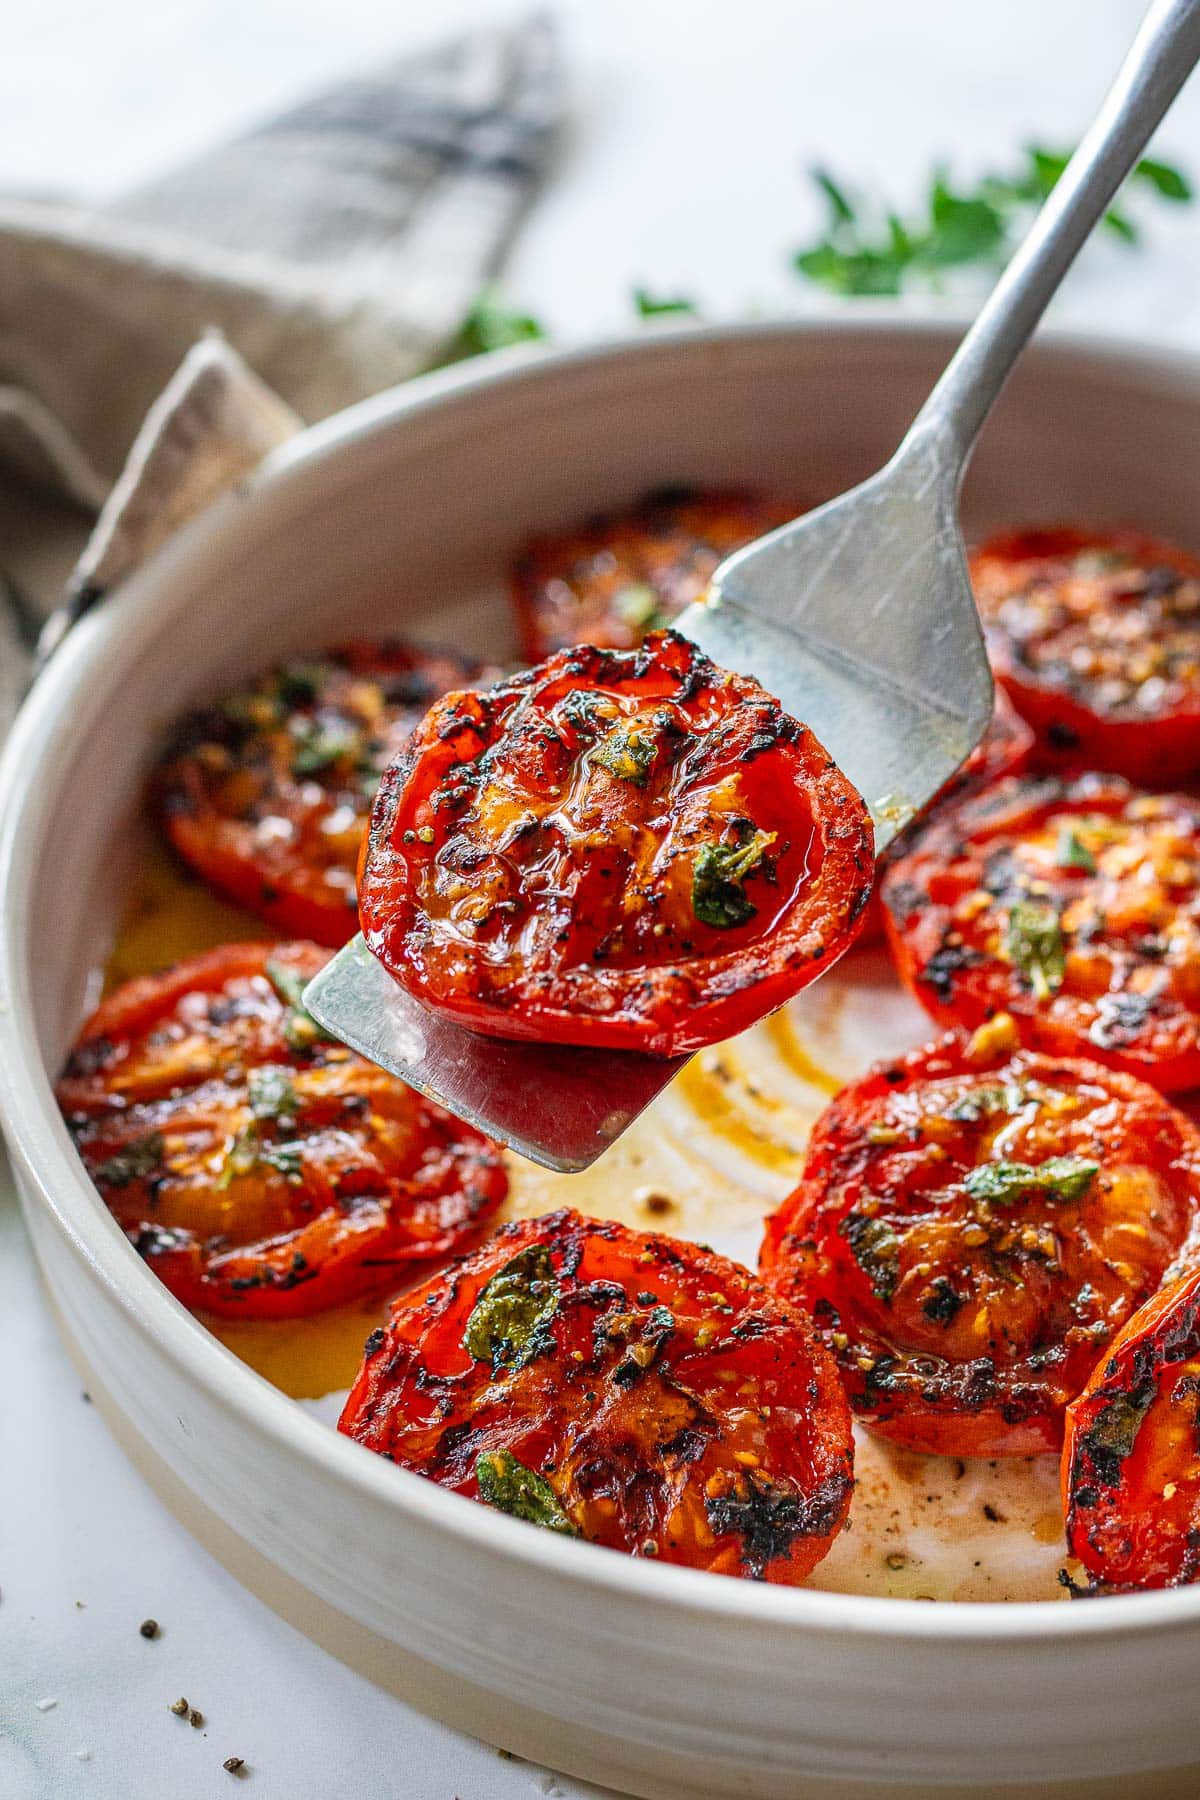 Savory grilled tomatoes with garlic and oregano, olive oil, and balsamic vinegar. In a serving bowl, being served. 